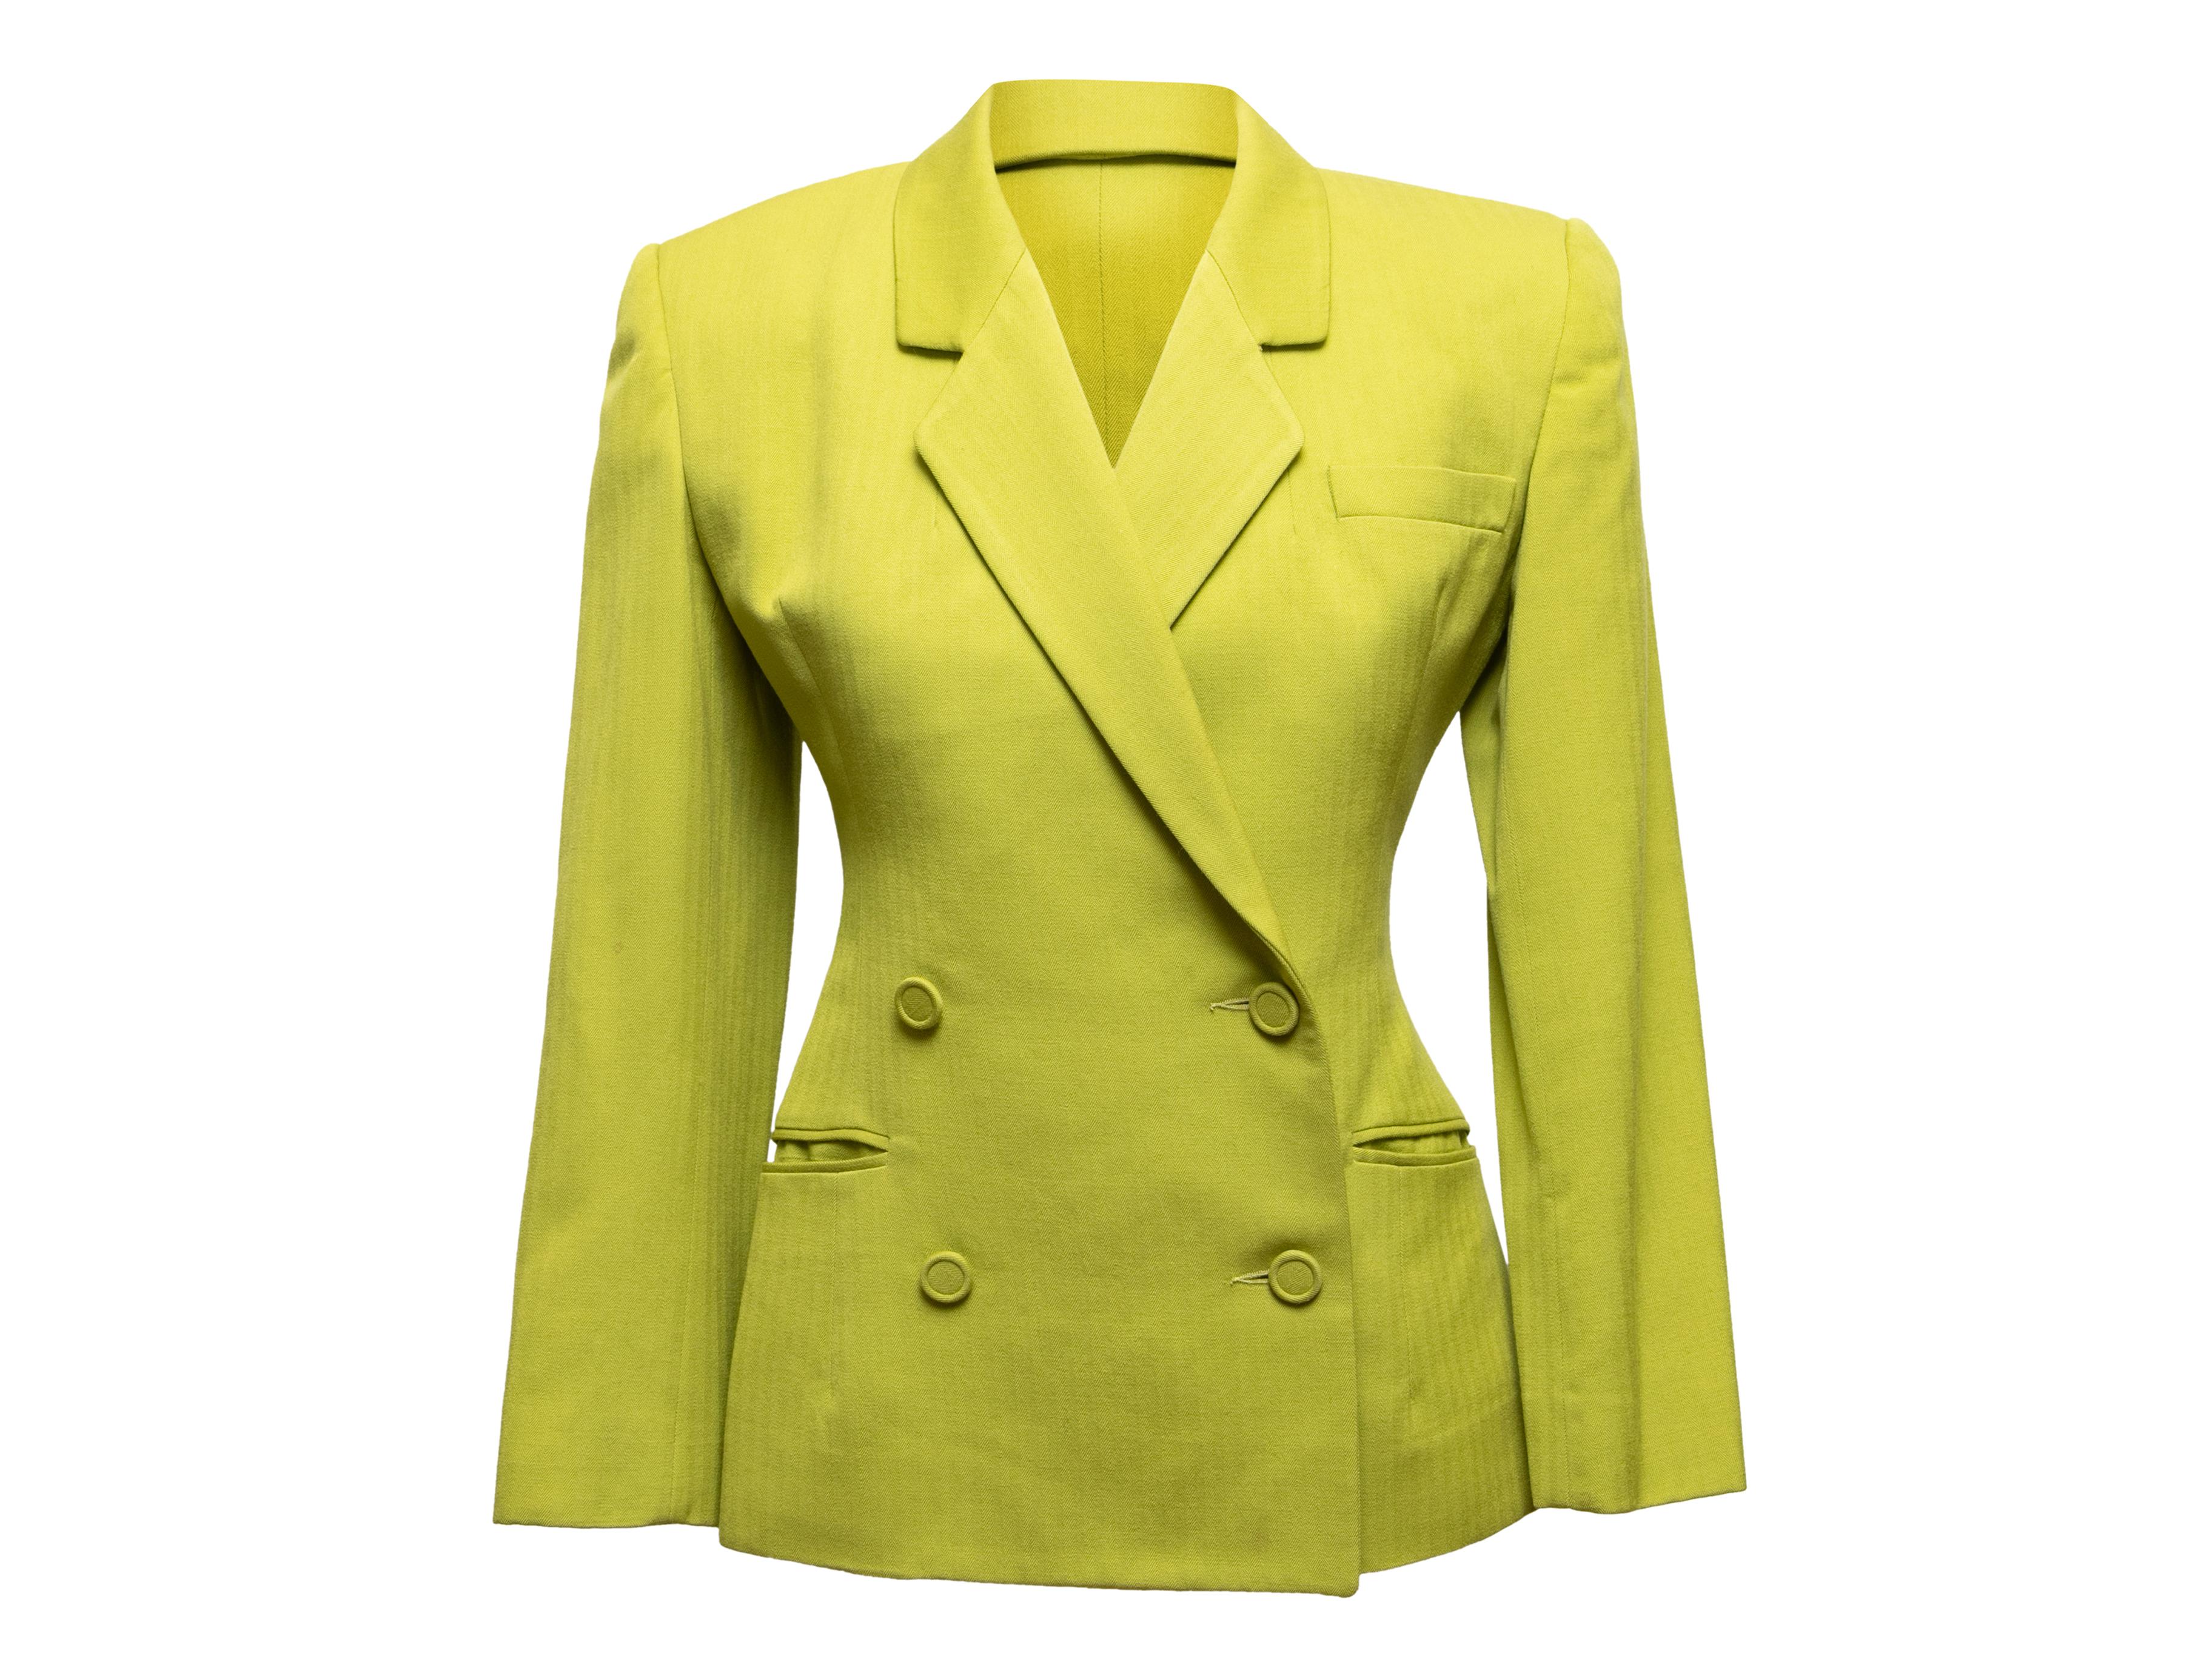 Vintage lime green double-breasted blazer by Omo Norma Kamali. Circa 1980s. Notched lapel. Structured shoulders. Three welt pockets. Front button closures. 34